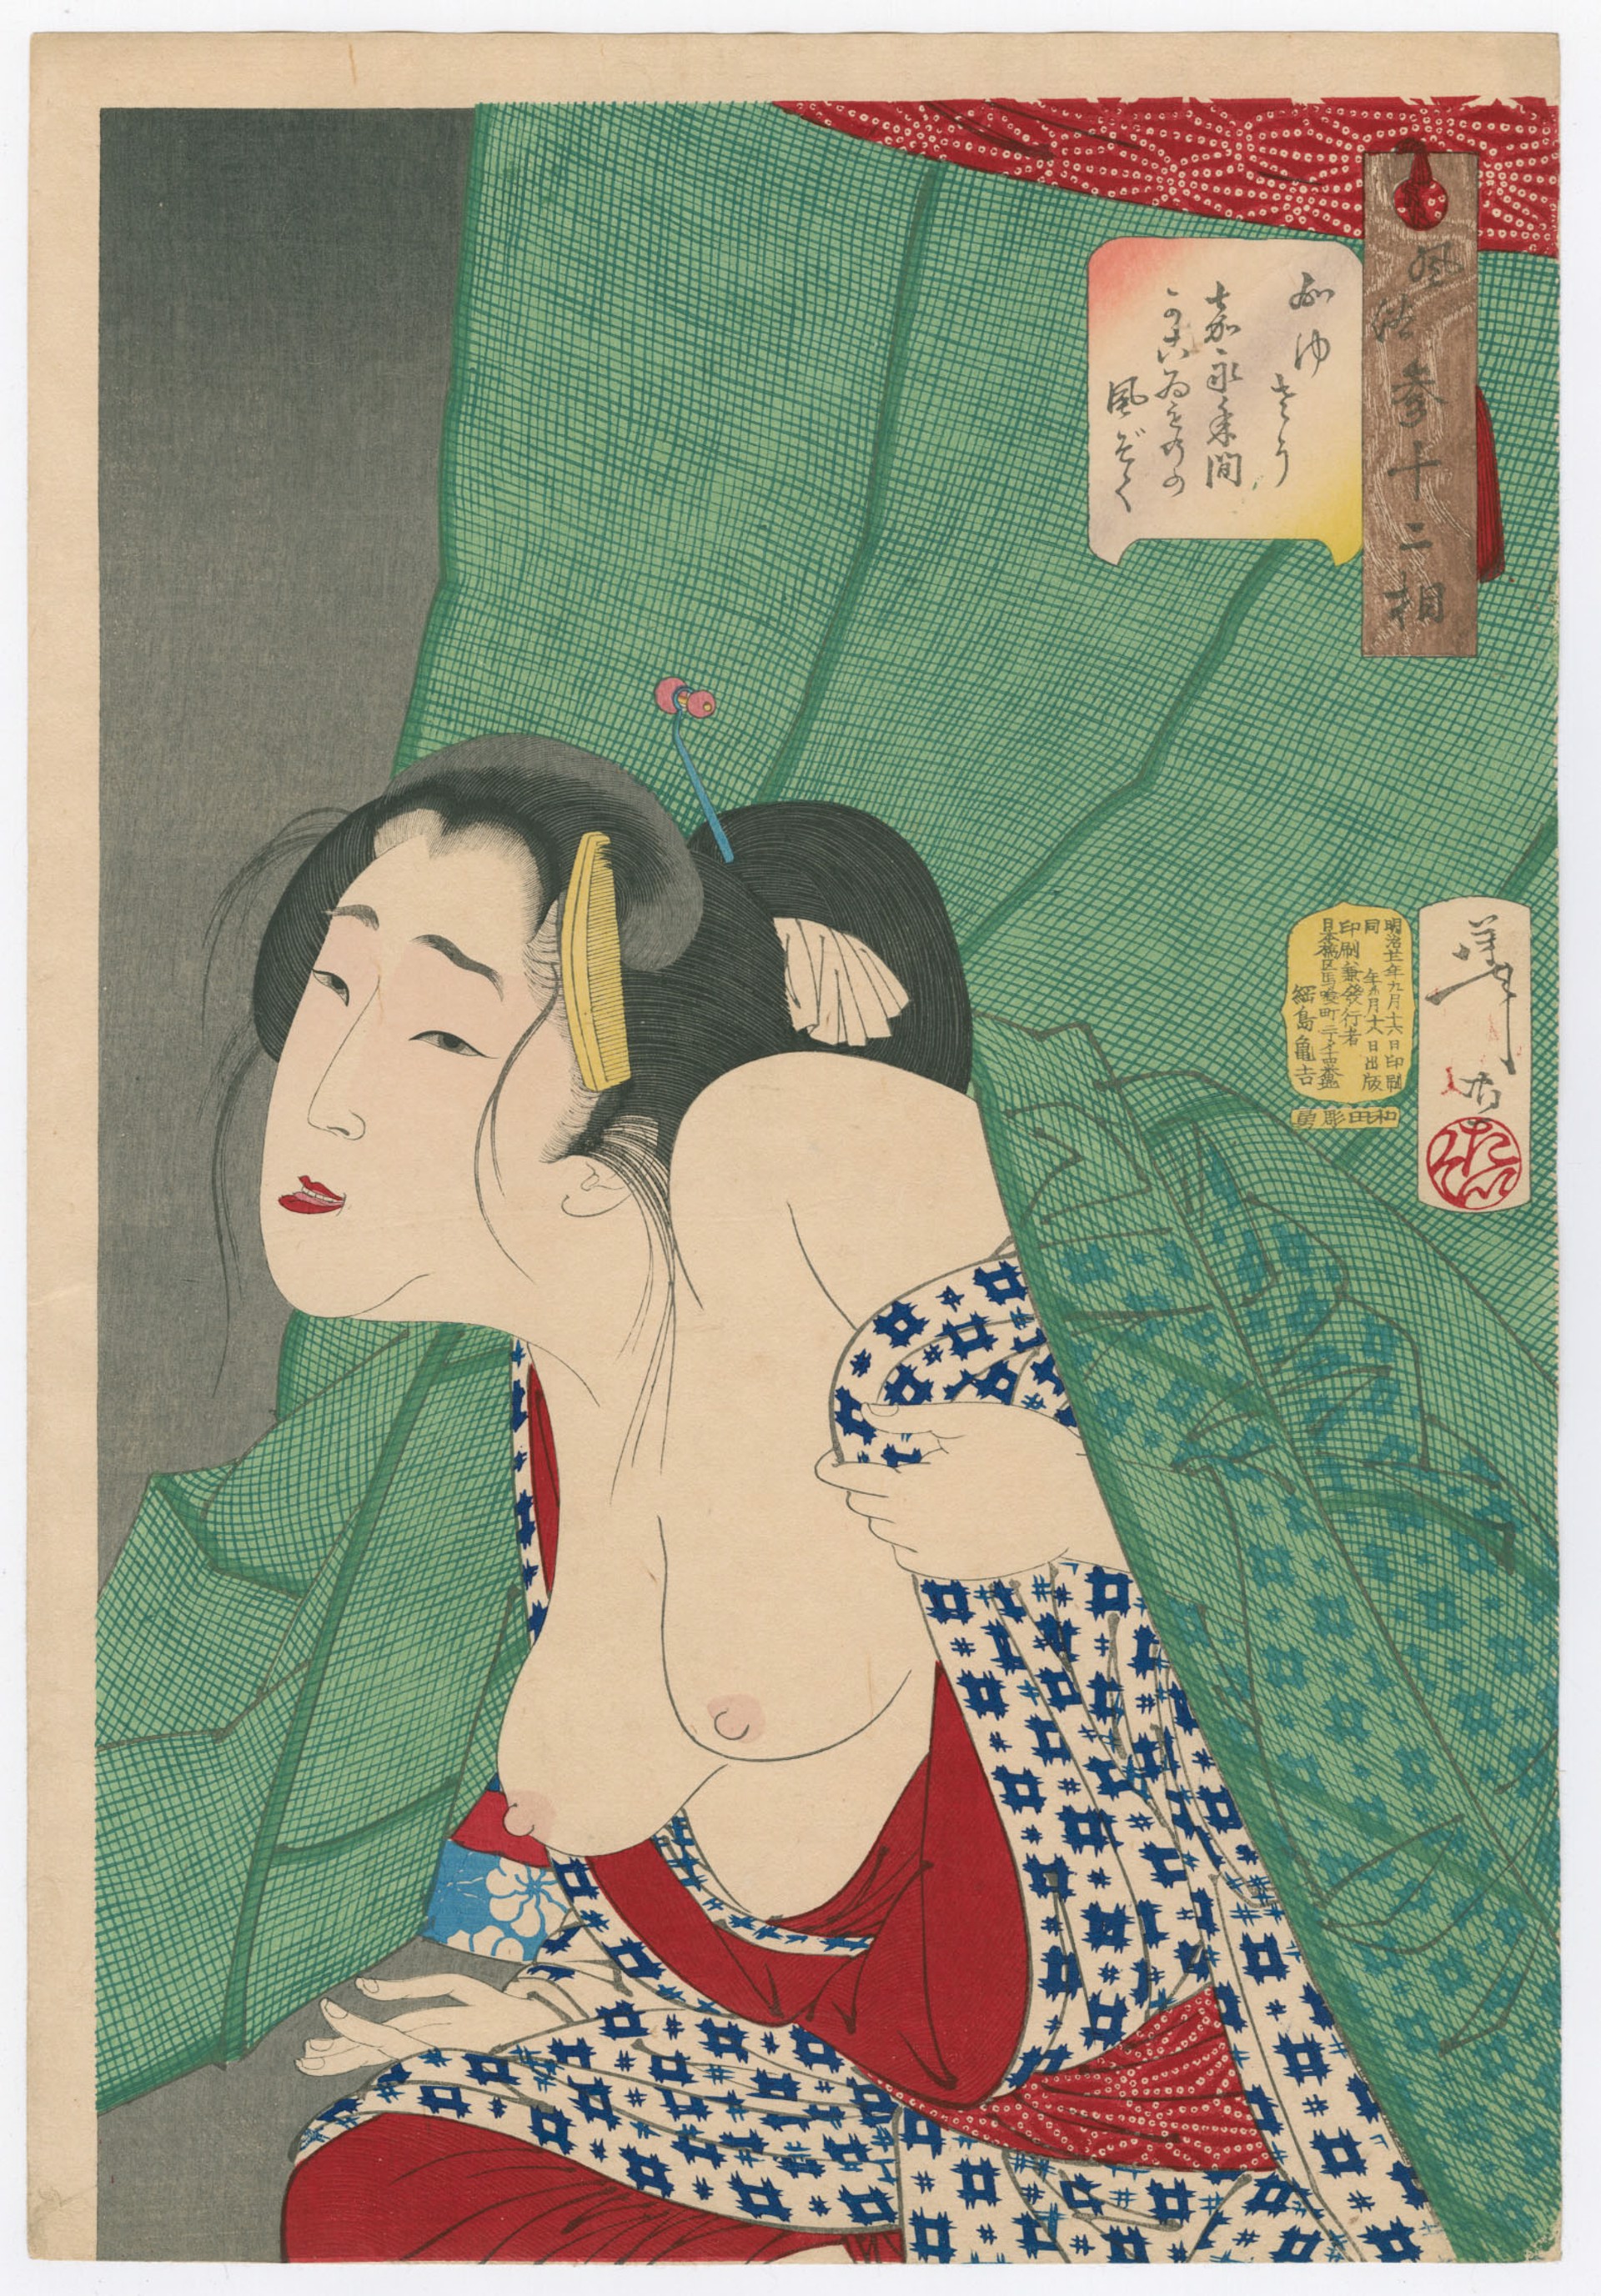 Looking Itchy: The Appearance of a Kept Woman of the Kaei Era (1848-54) 32 Aspects of Women by Yoshitoshi